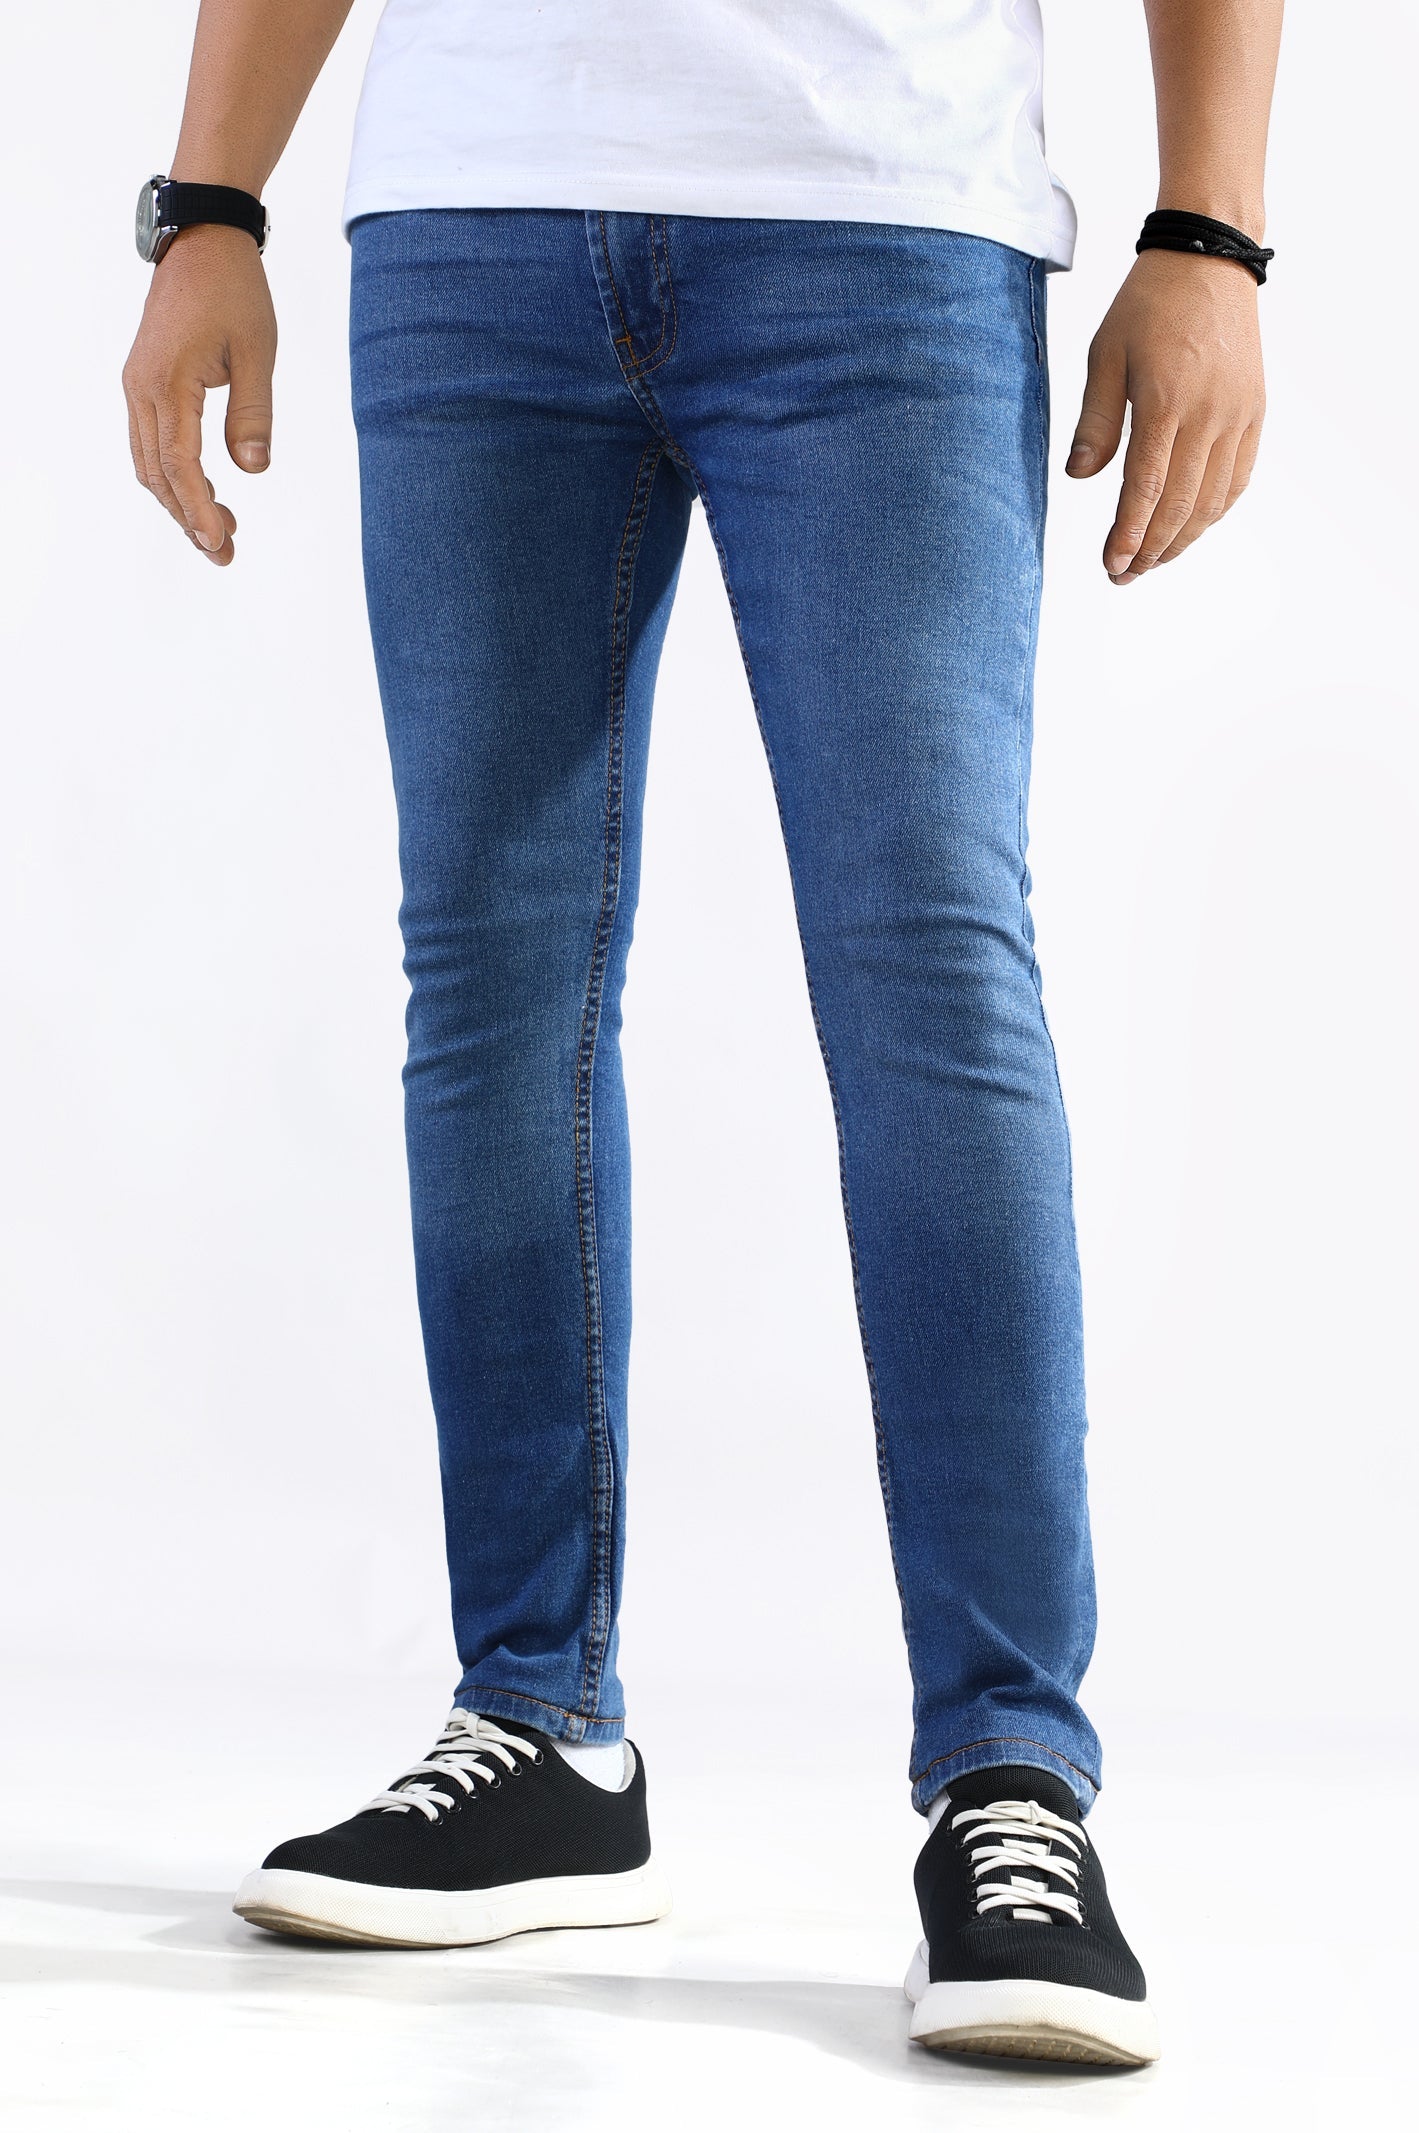 Medium Blue Slim Fit Jeans From Diners